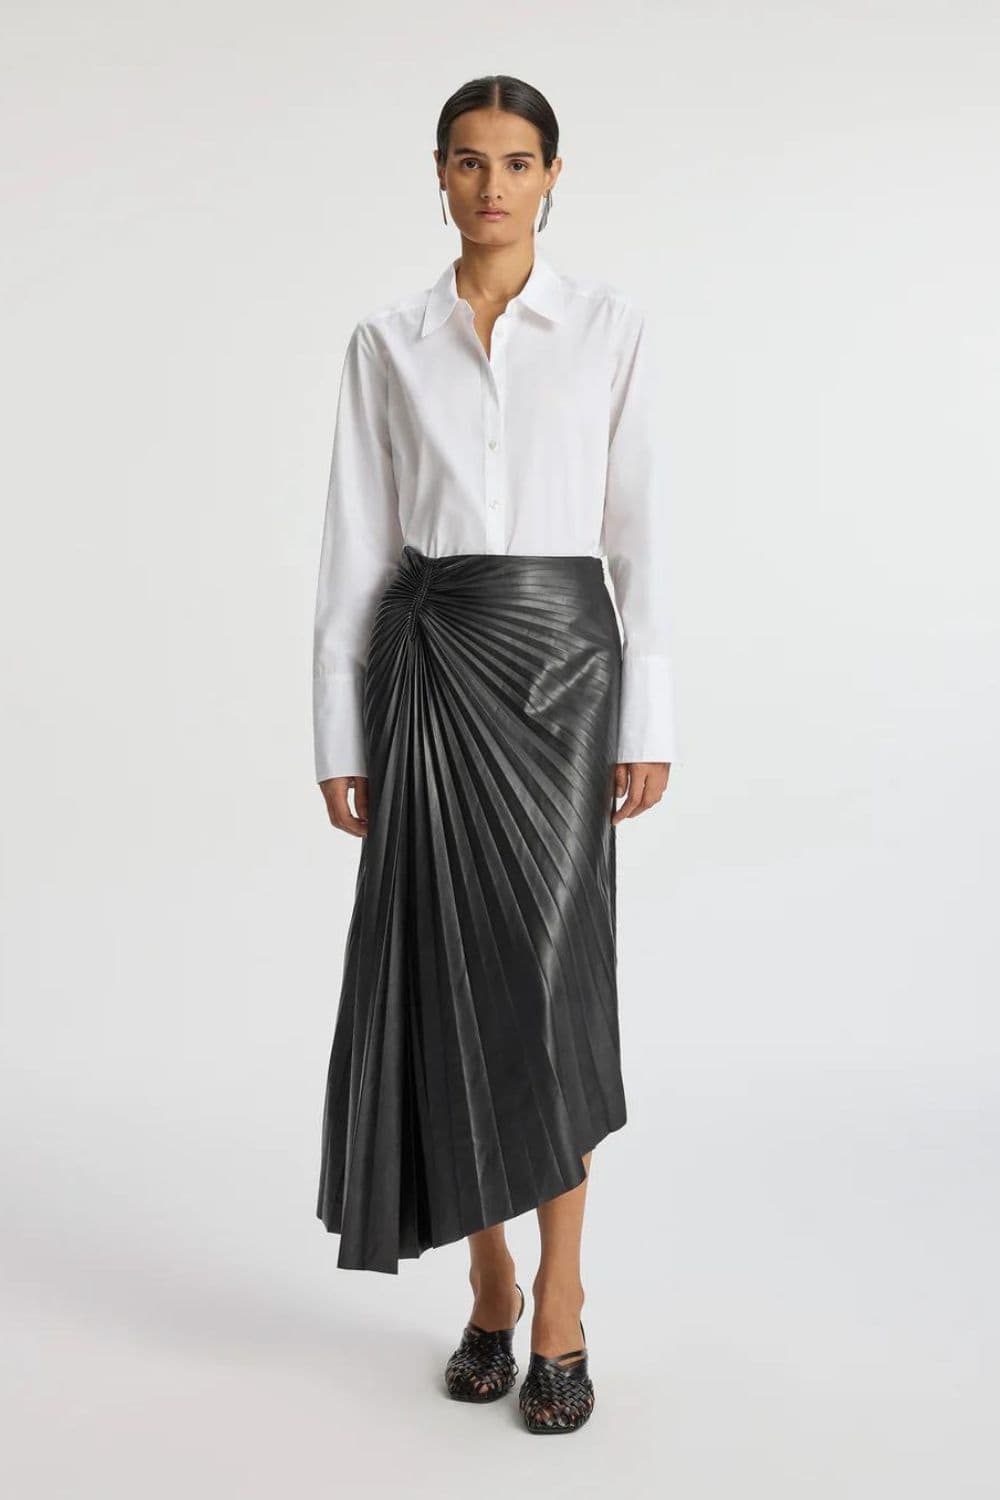 What to wear with Black Leather Skirt with Pleats + Button Up Body Suit